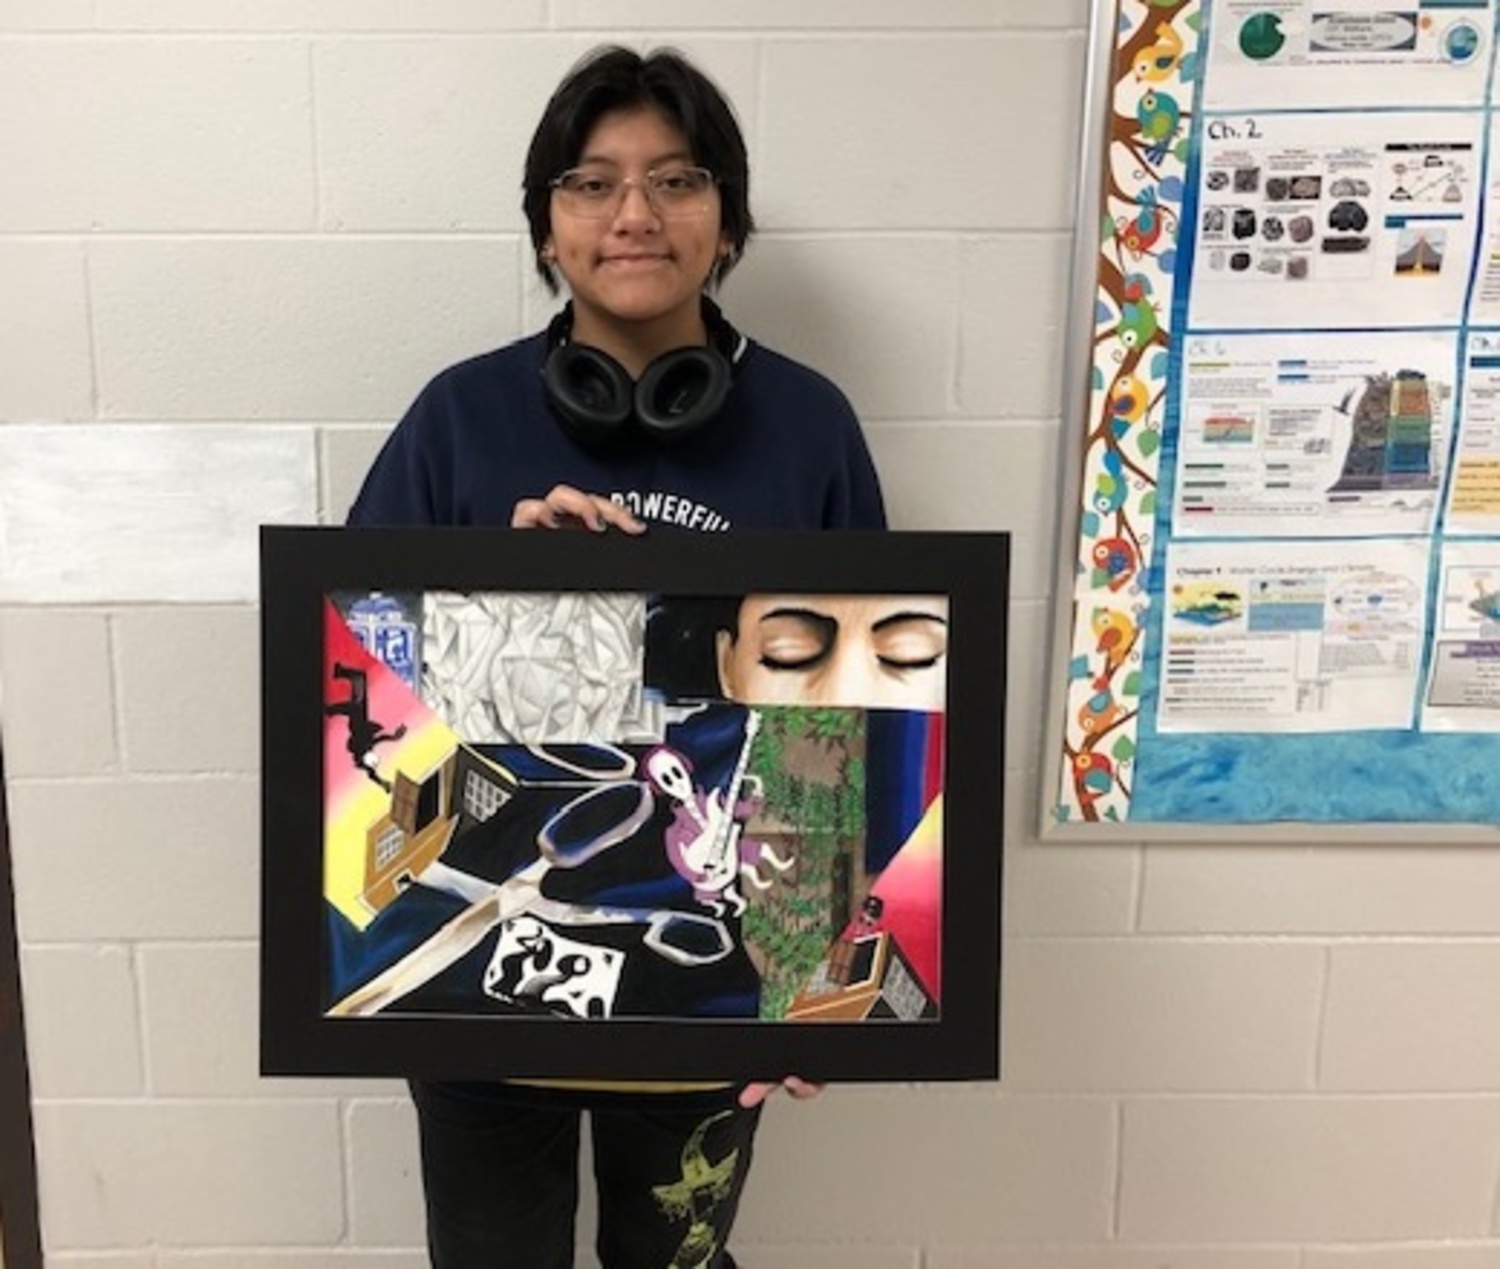 The artwork of Southampton High School senior Arian Rojas is one of two Southampton High School students whose work is on display in 